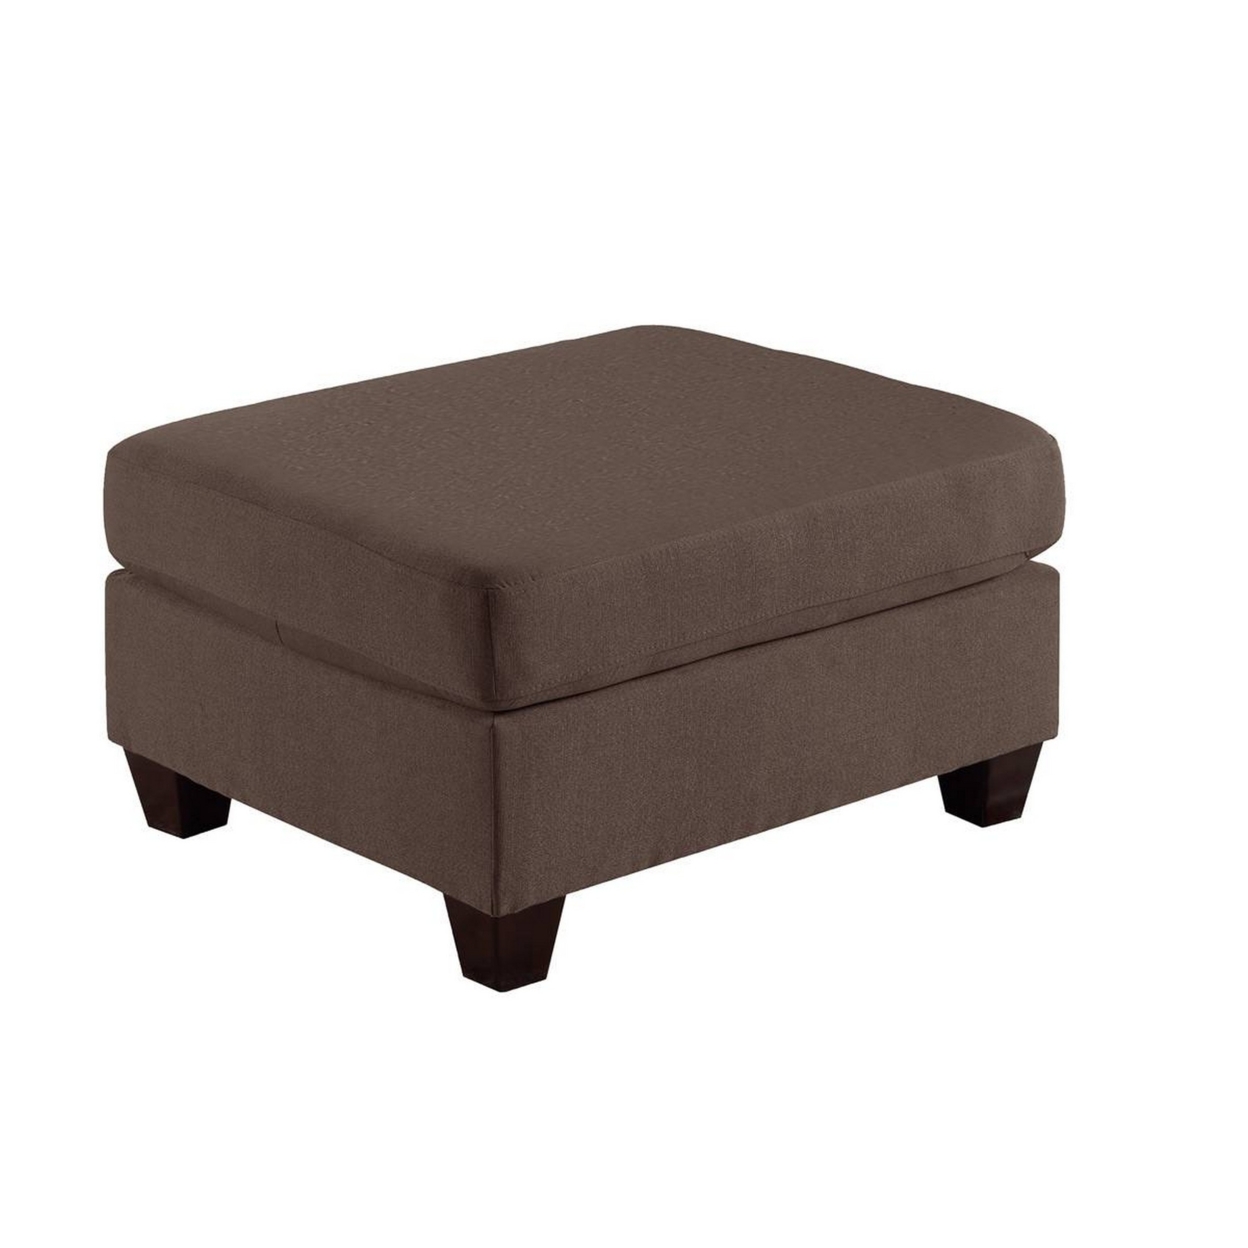 32 Inch Modern Square Ottoman With Foam Seating, Coffee Brown Linen Fabric